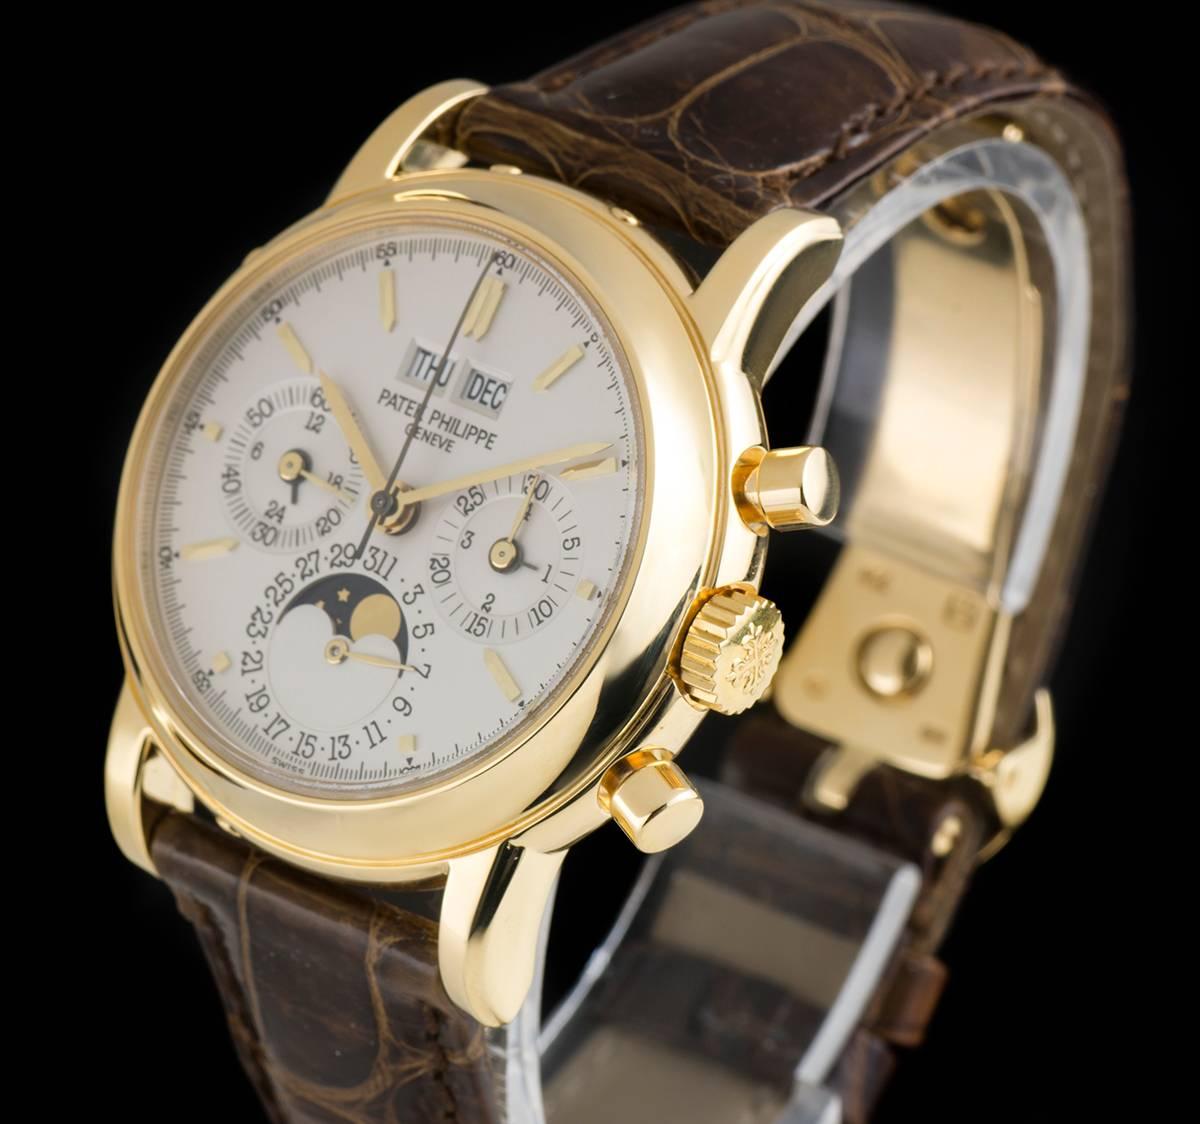 An 18k Yellow Gold Perpetual Calendar Chronograph Gents Wristwatch, opaline silver dial with applied hour markers, 30 minute recorder and leap year indicator at 3 0'clock, date sub-dial and moonphase aperture at 6 0'clock, small seconds and 24 hour